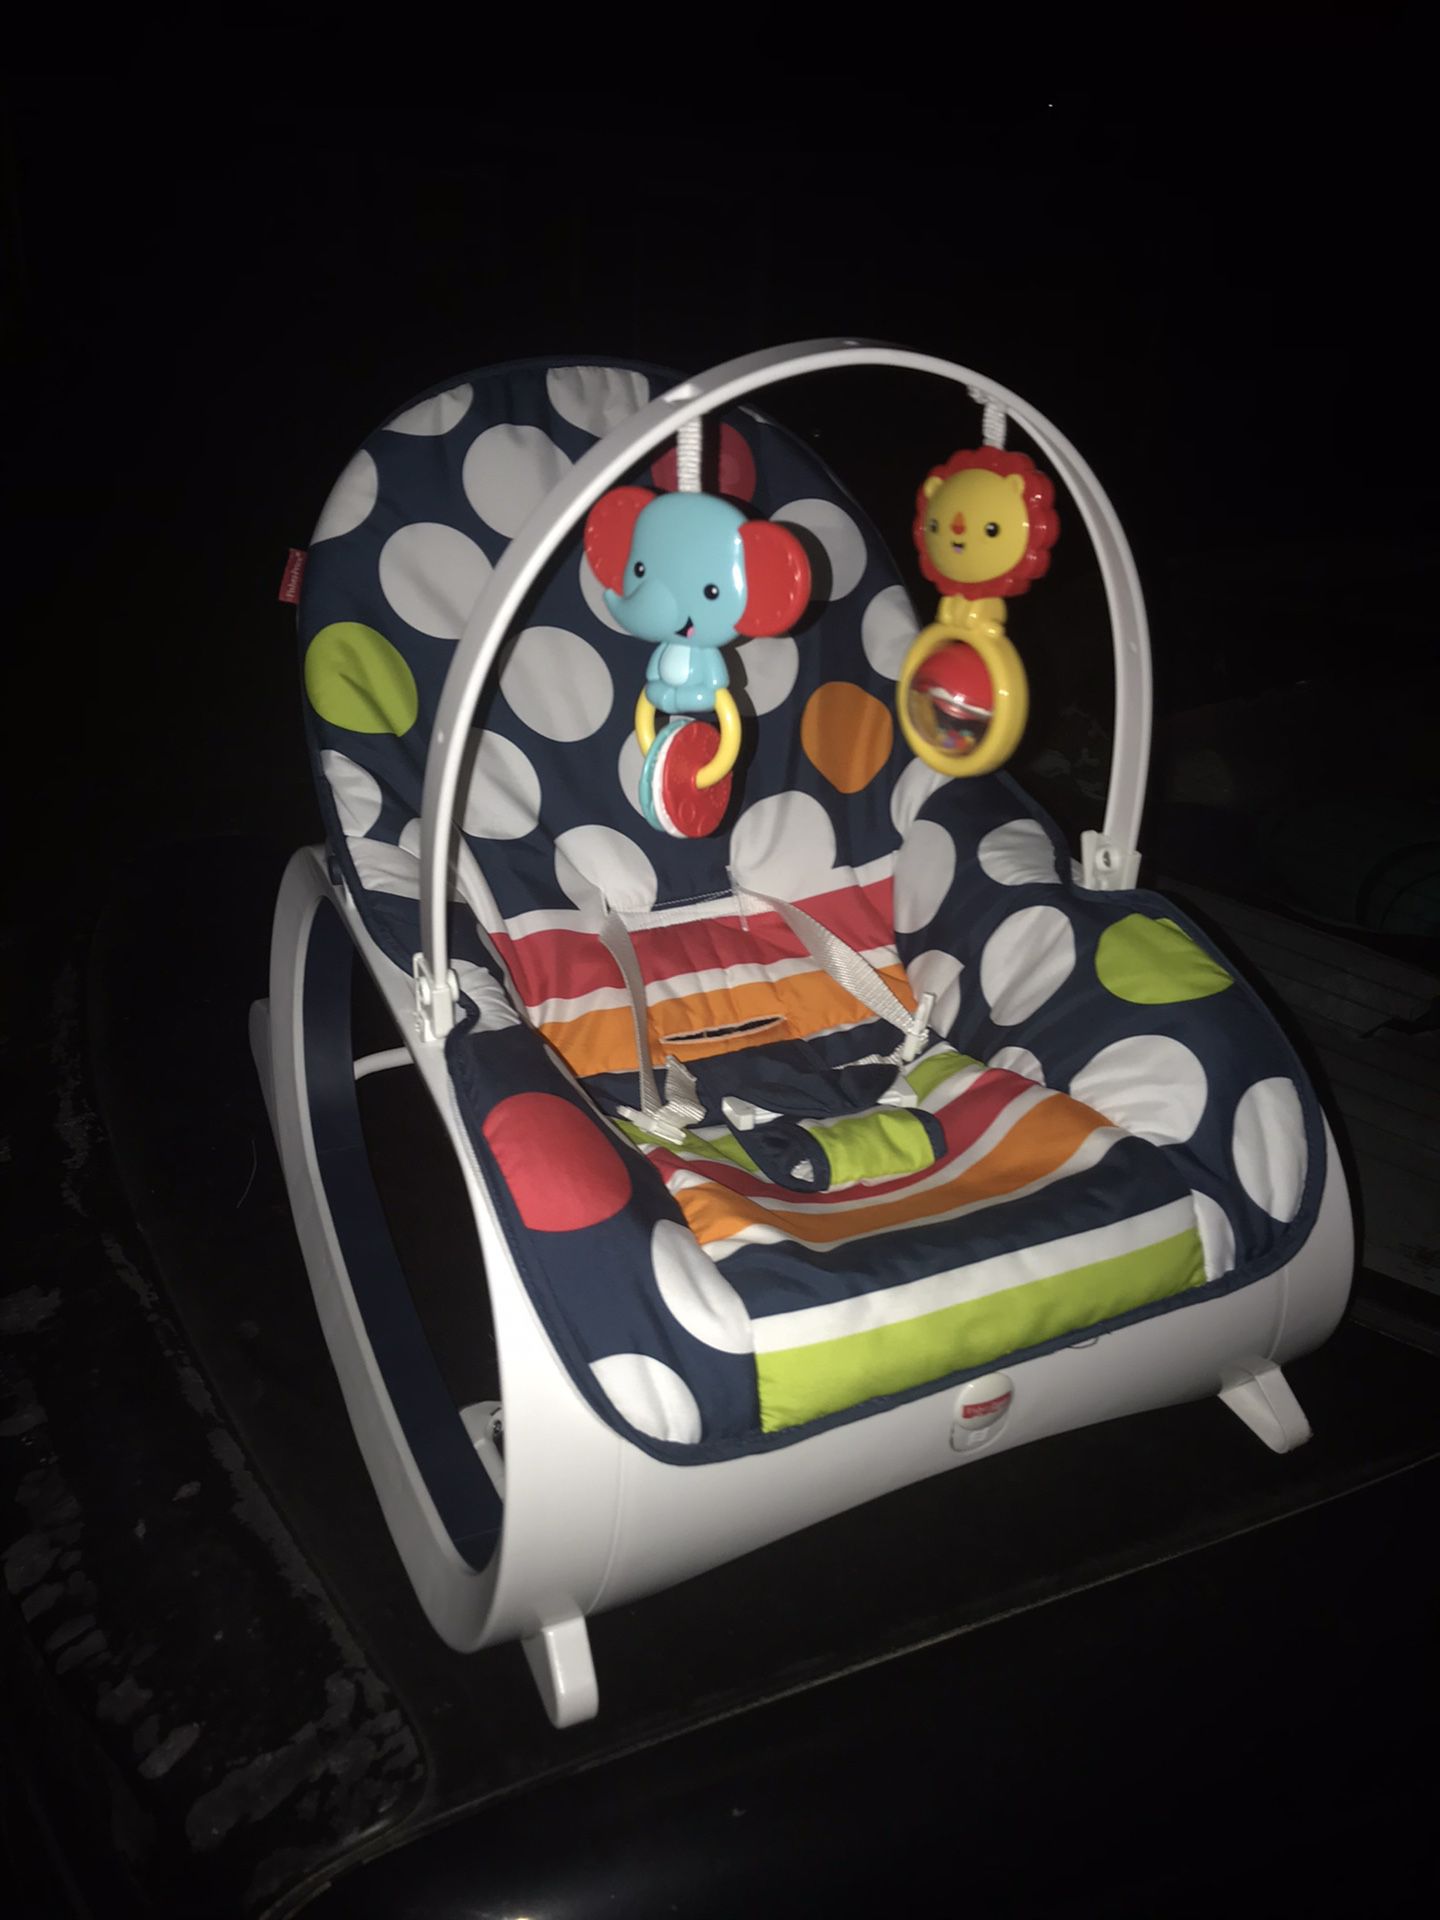 Lnew Fisher Price Baby Rocking Vibrating Bouncy Chair Very Nice Only $20 Firm